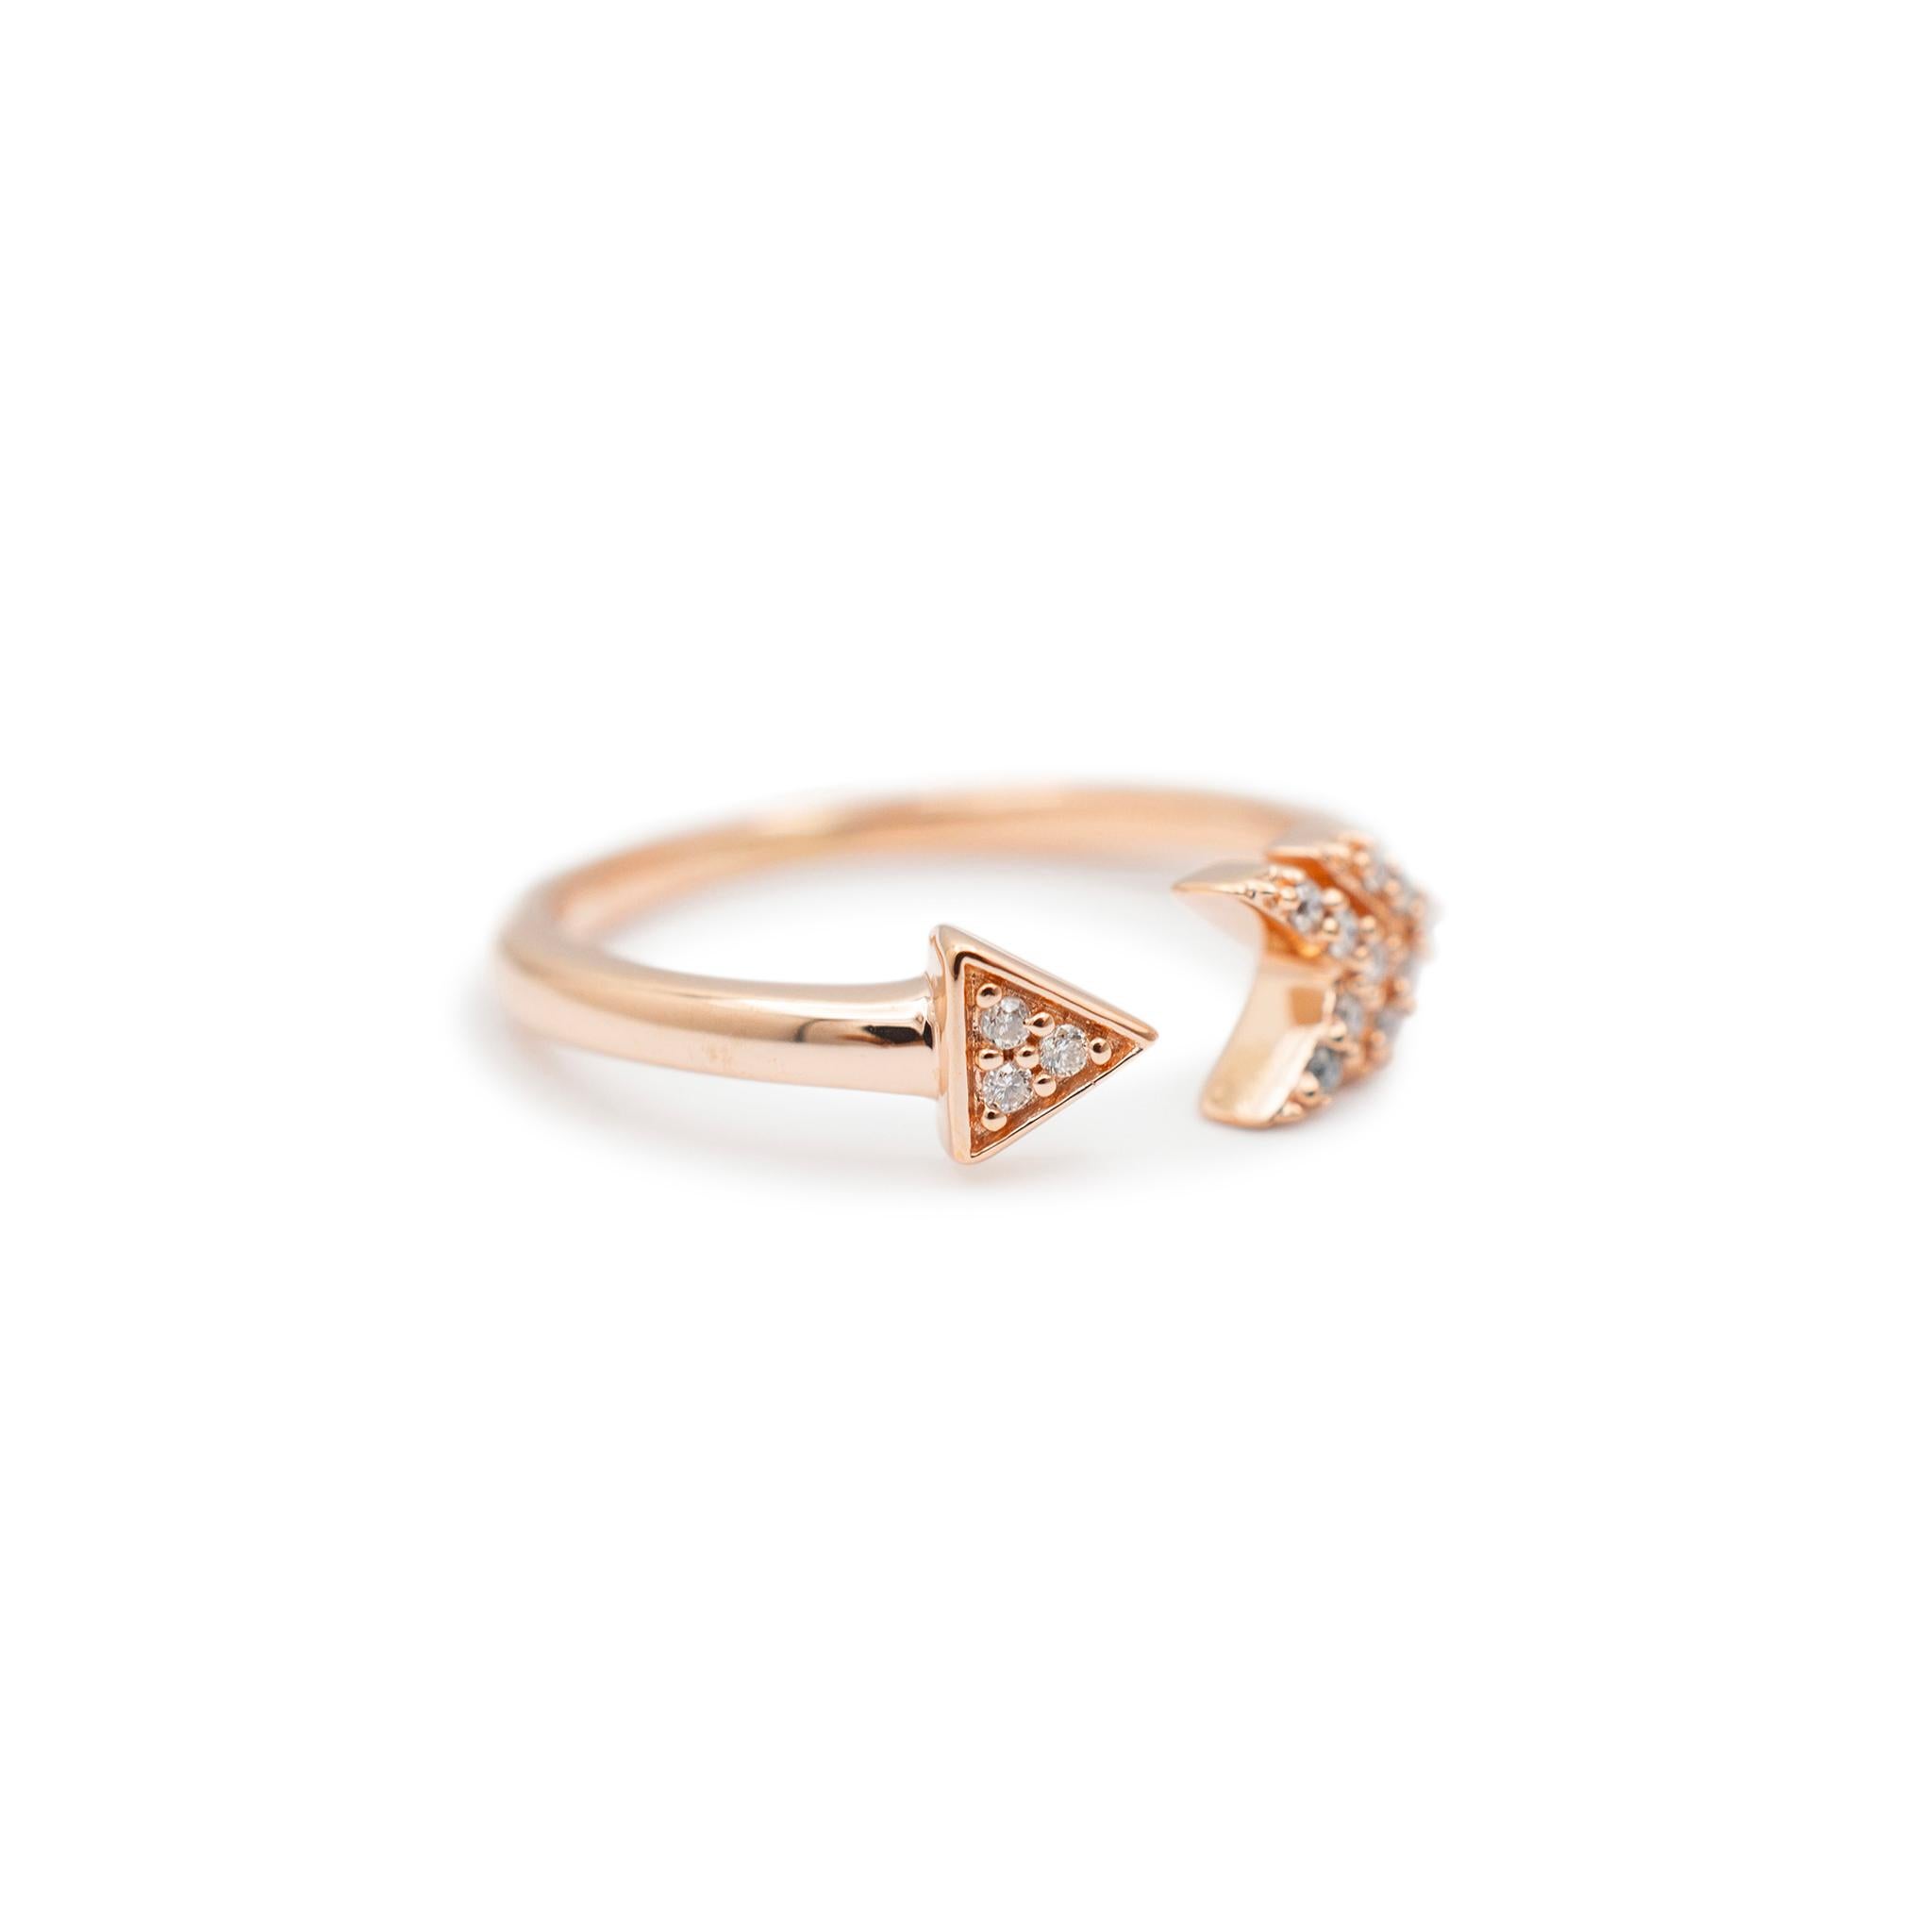 Ladies 10K Rose Gold Arrow Deconstructed Pave Diamond Cocktail Ring In Excellent Condition For Sale In Houston, TX